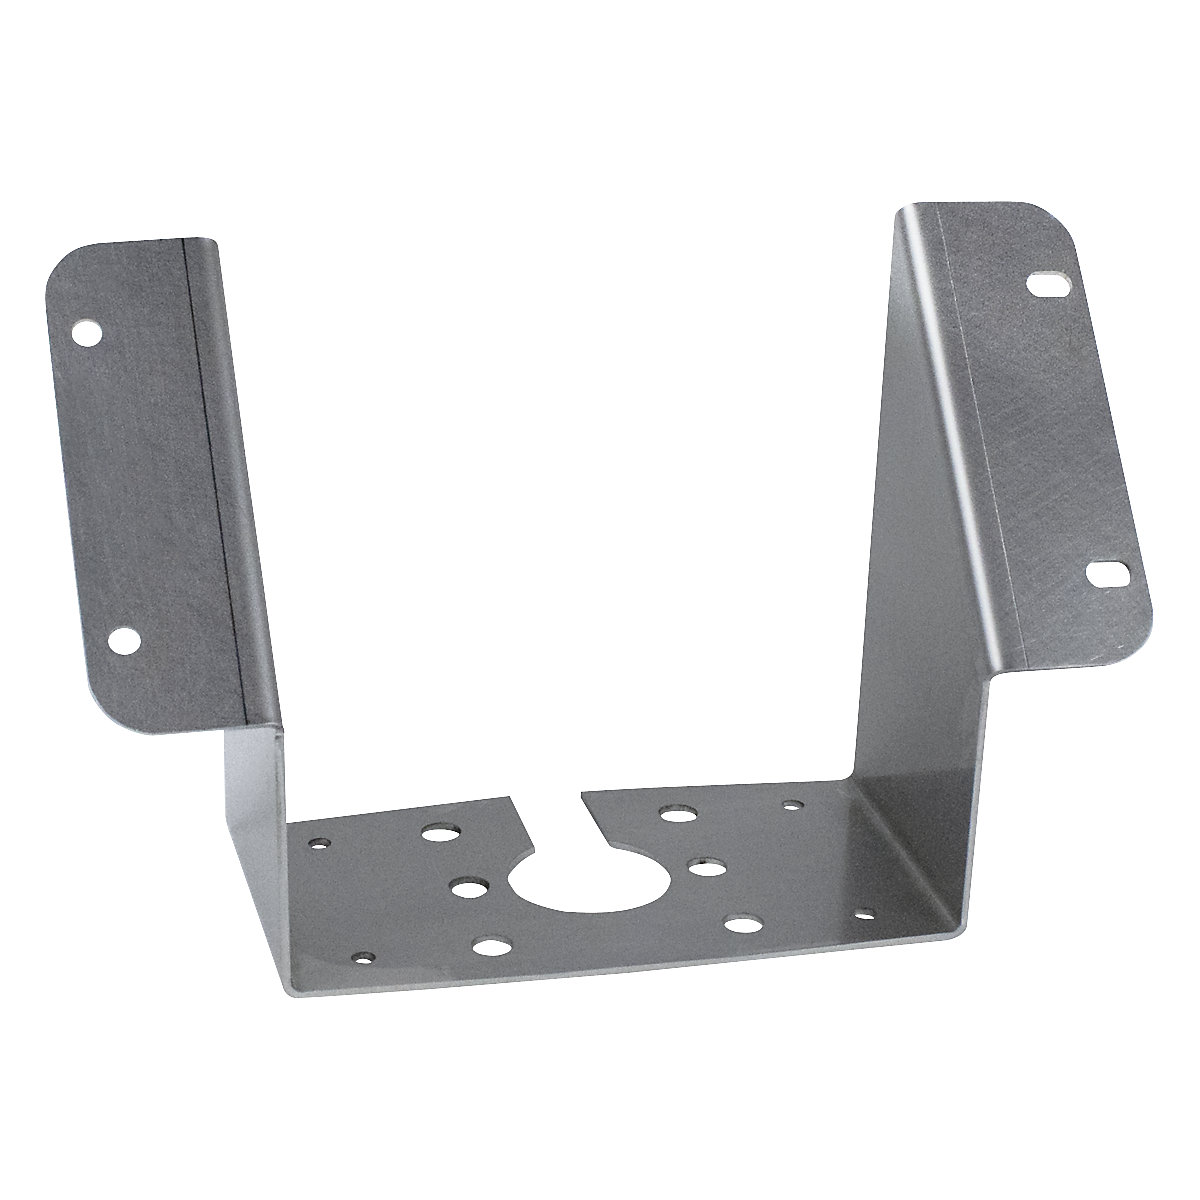 Wall bracket/holding stand